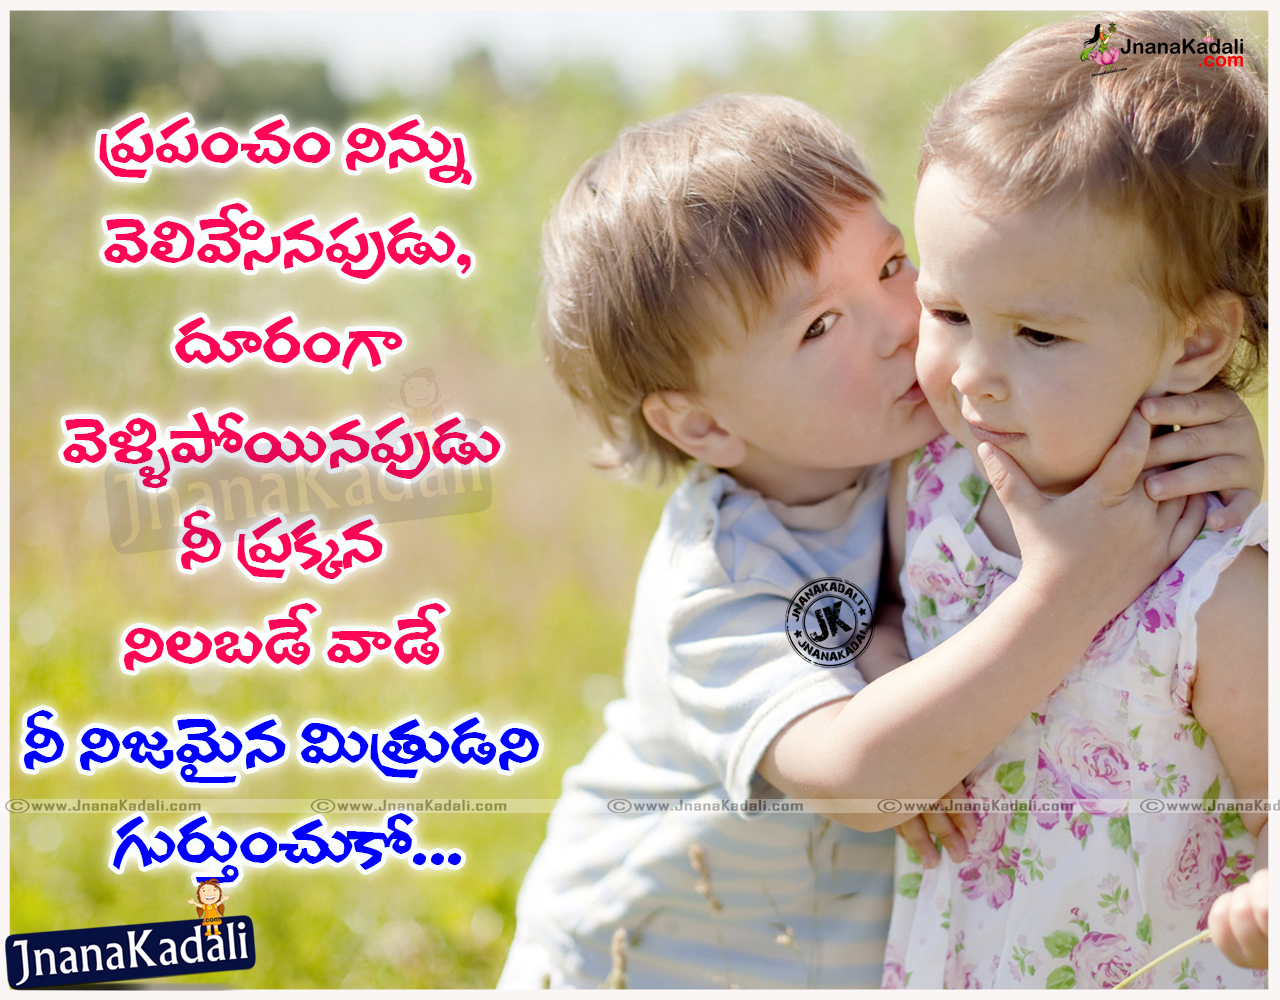 Telugu Friendship quotes with friendship kavithalu hd wallpapers ...